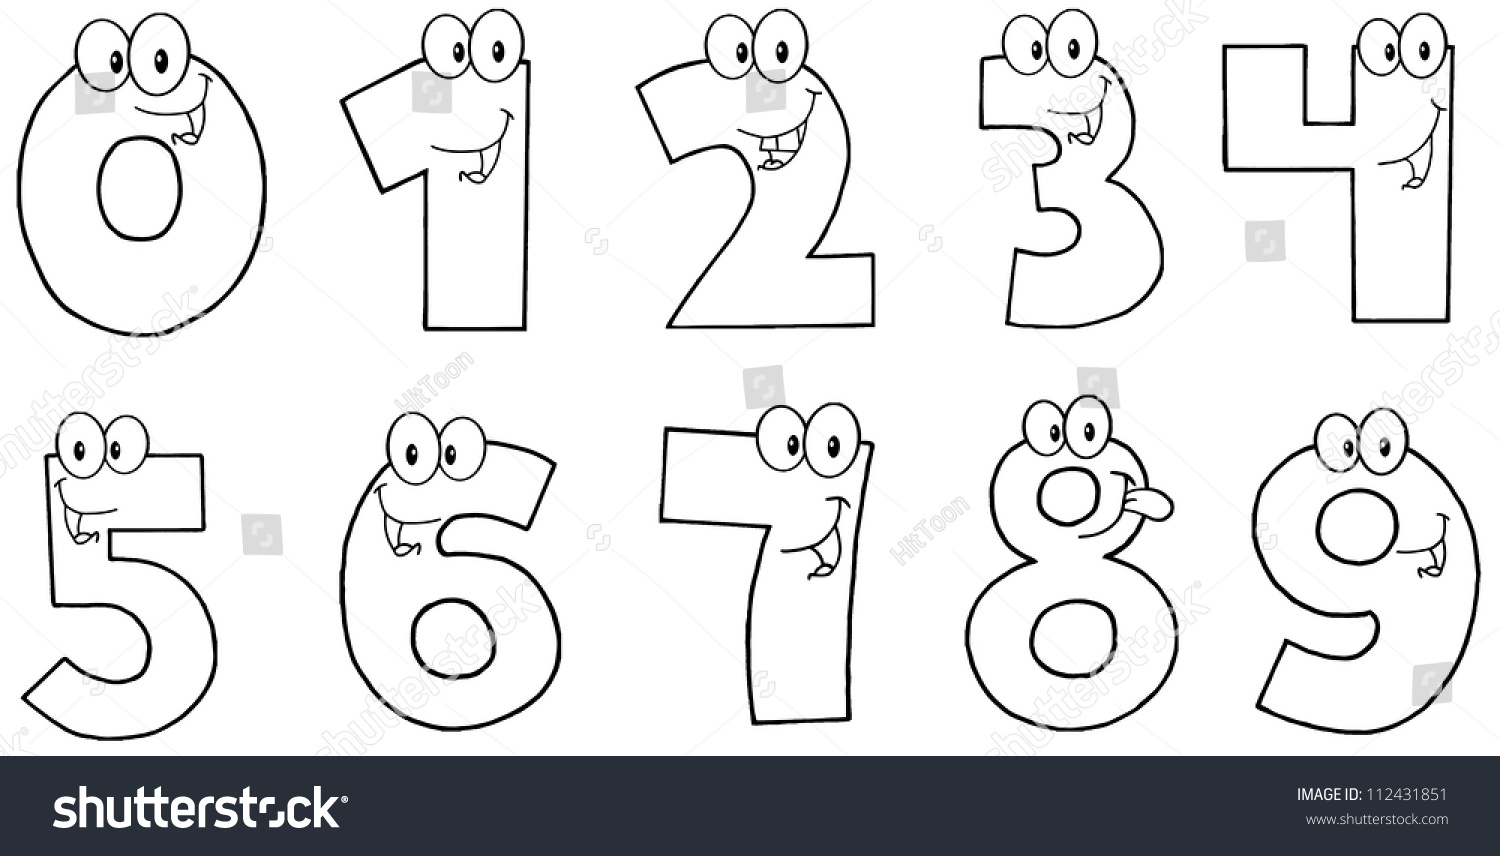 Outlined Funny Numbers Cartoon Characters Vector Stock Vector 112431851 ...